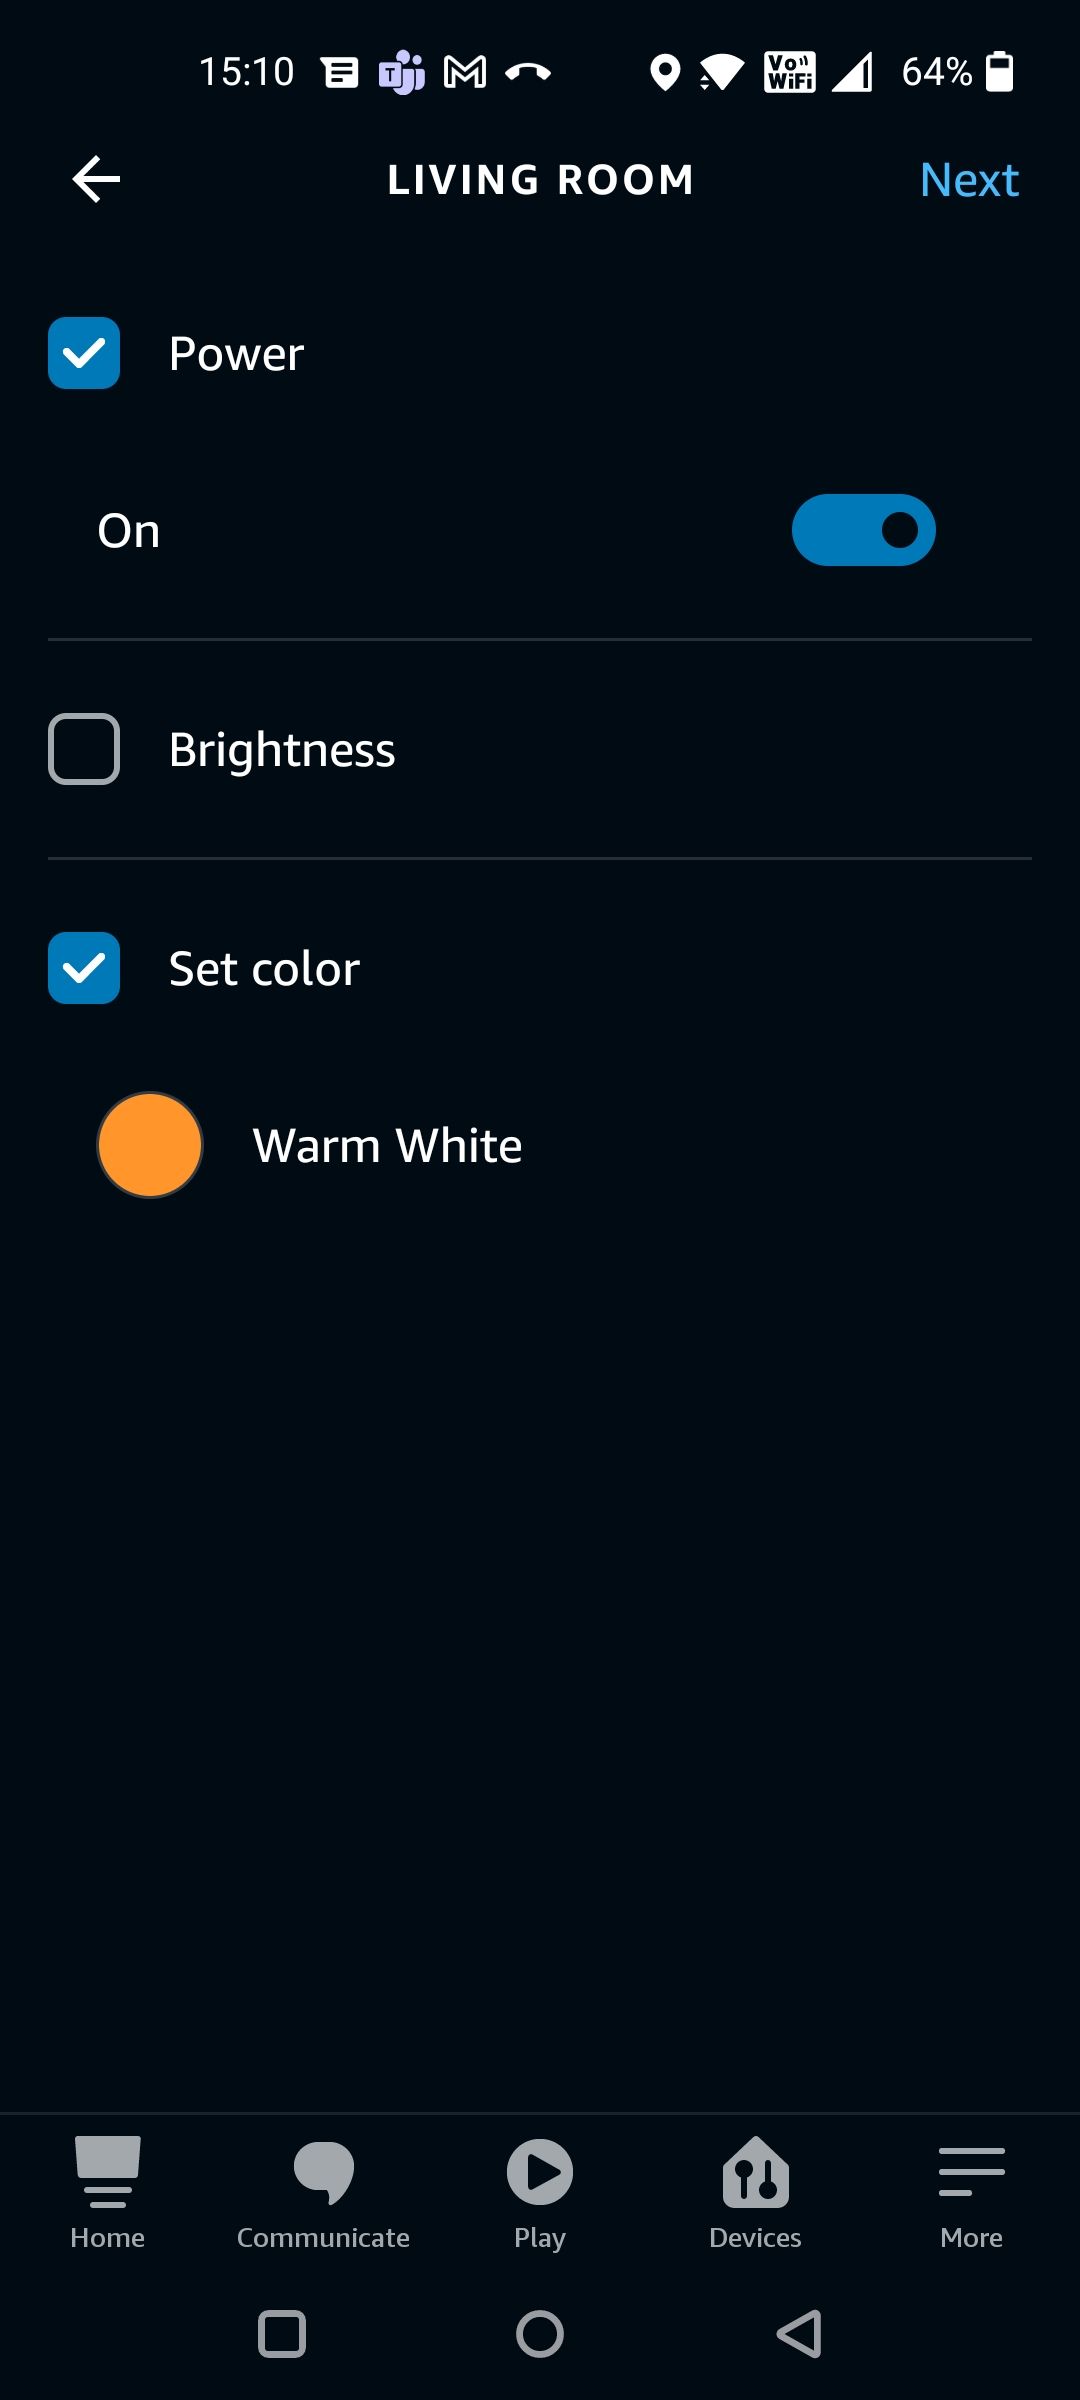 Choose Light and its Color for Start Your Day Routine